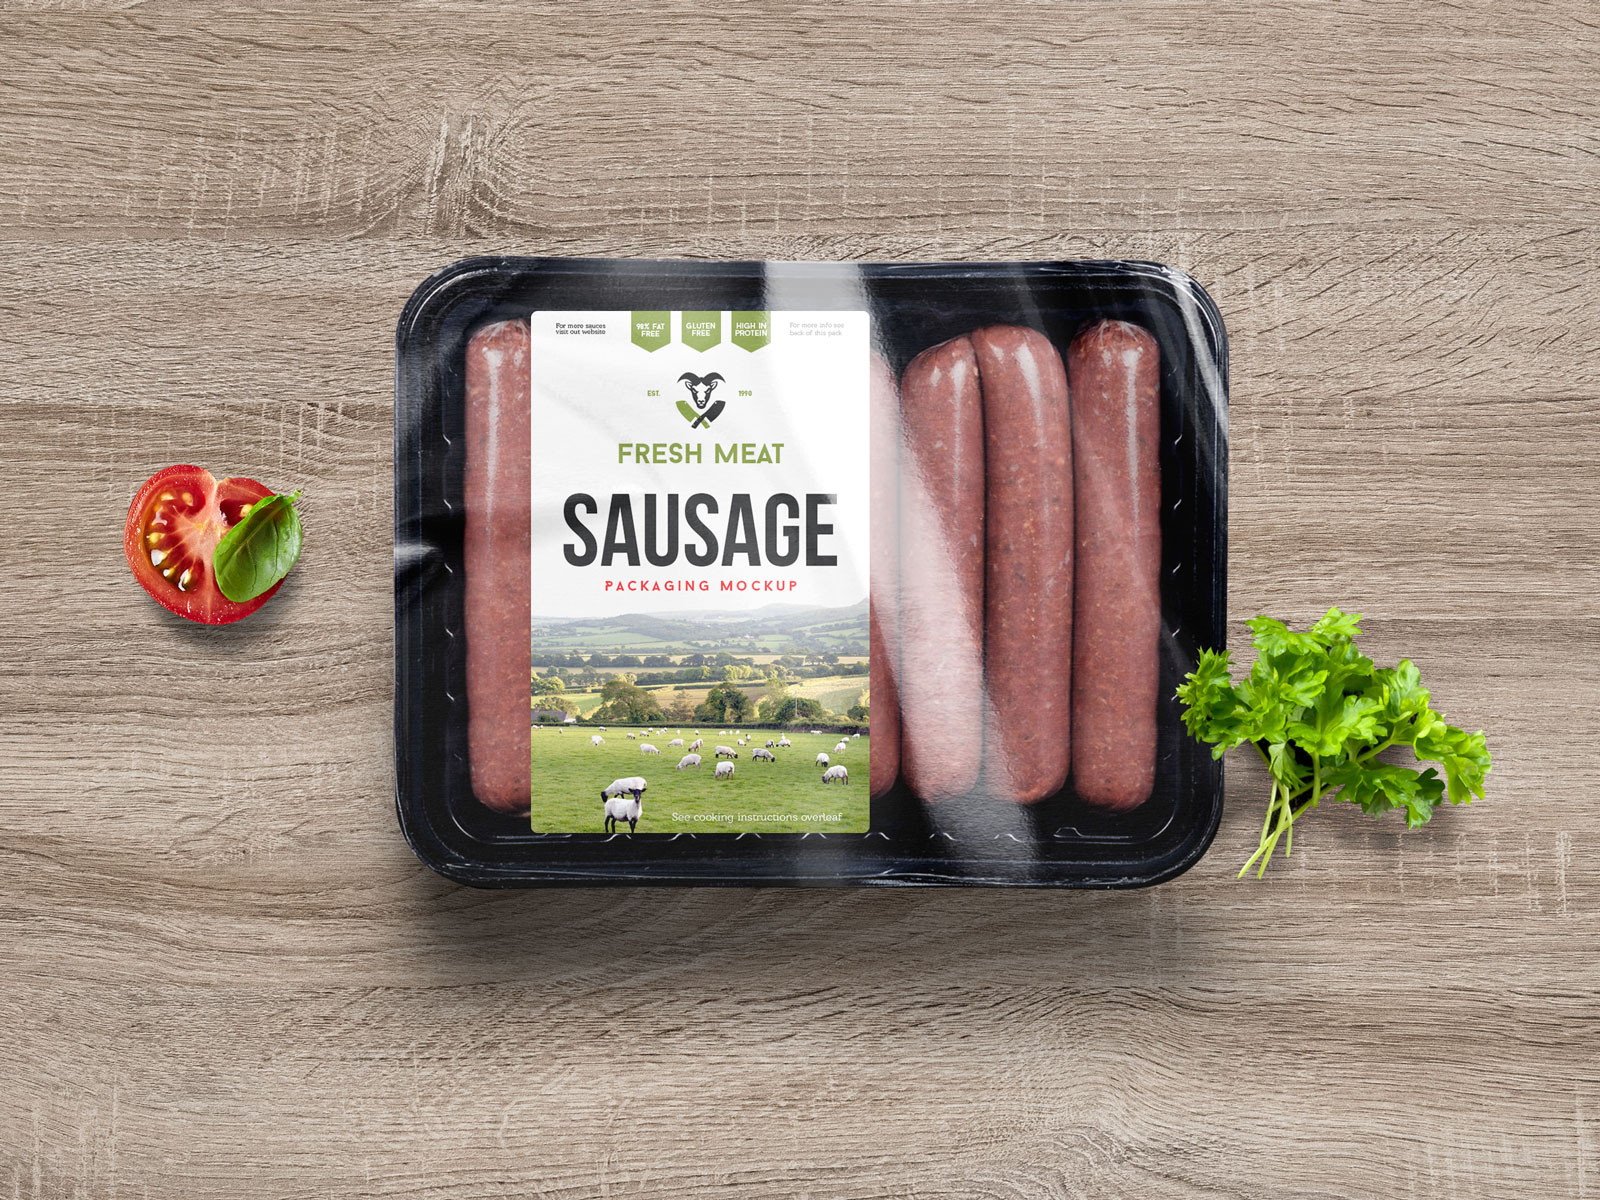 Download Free Sausage Food Packaging Mockup PSD by Zee Que | Designbolts on Dribbble